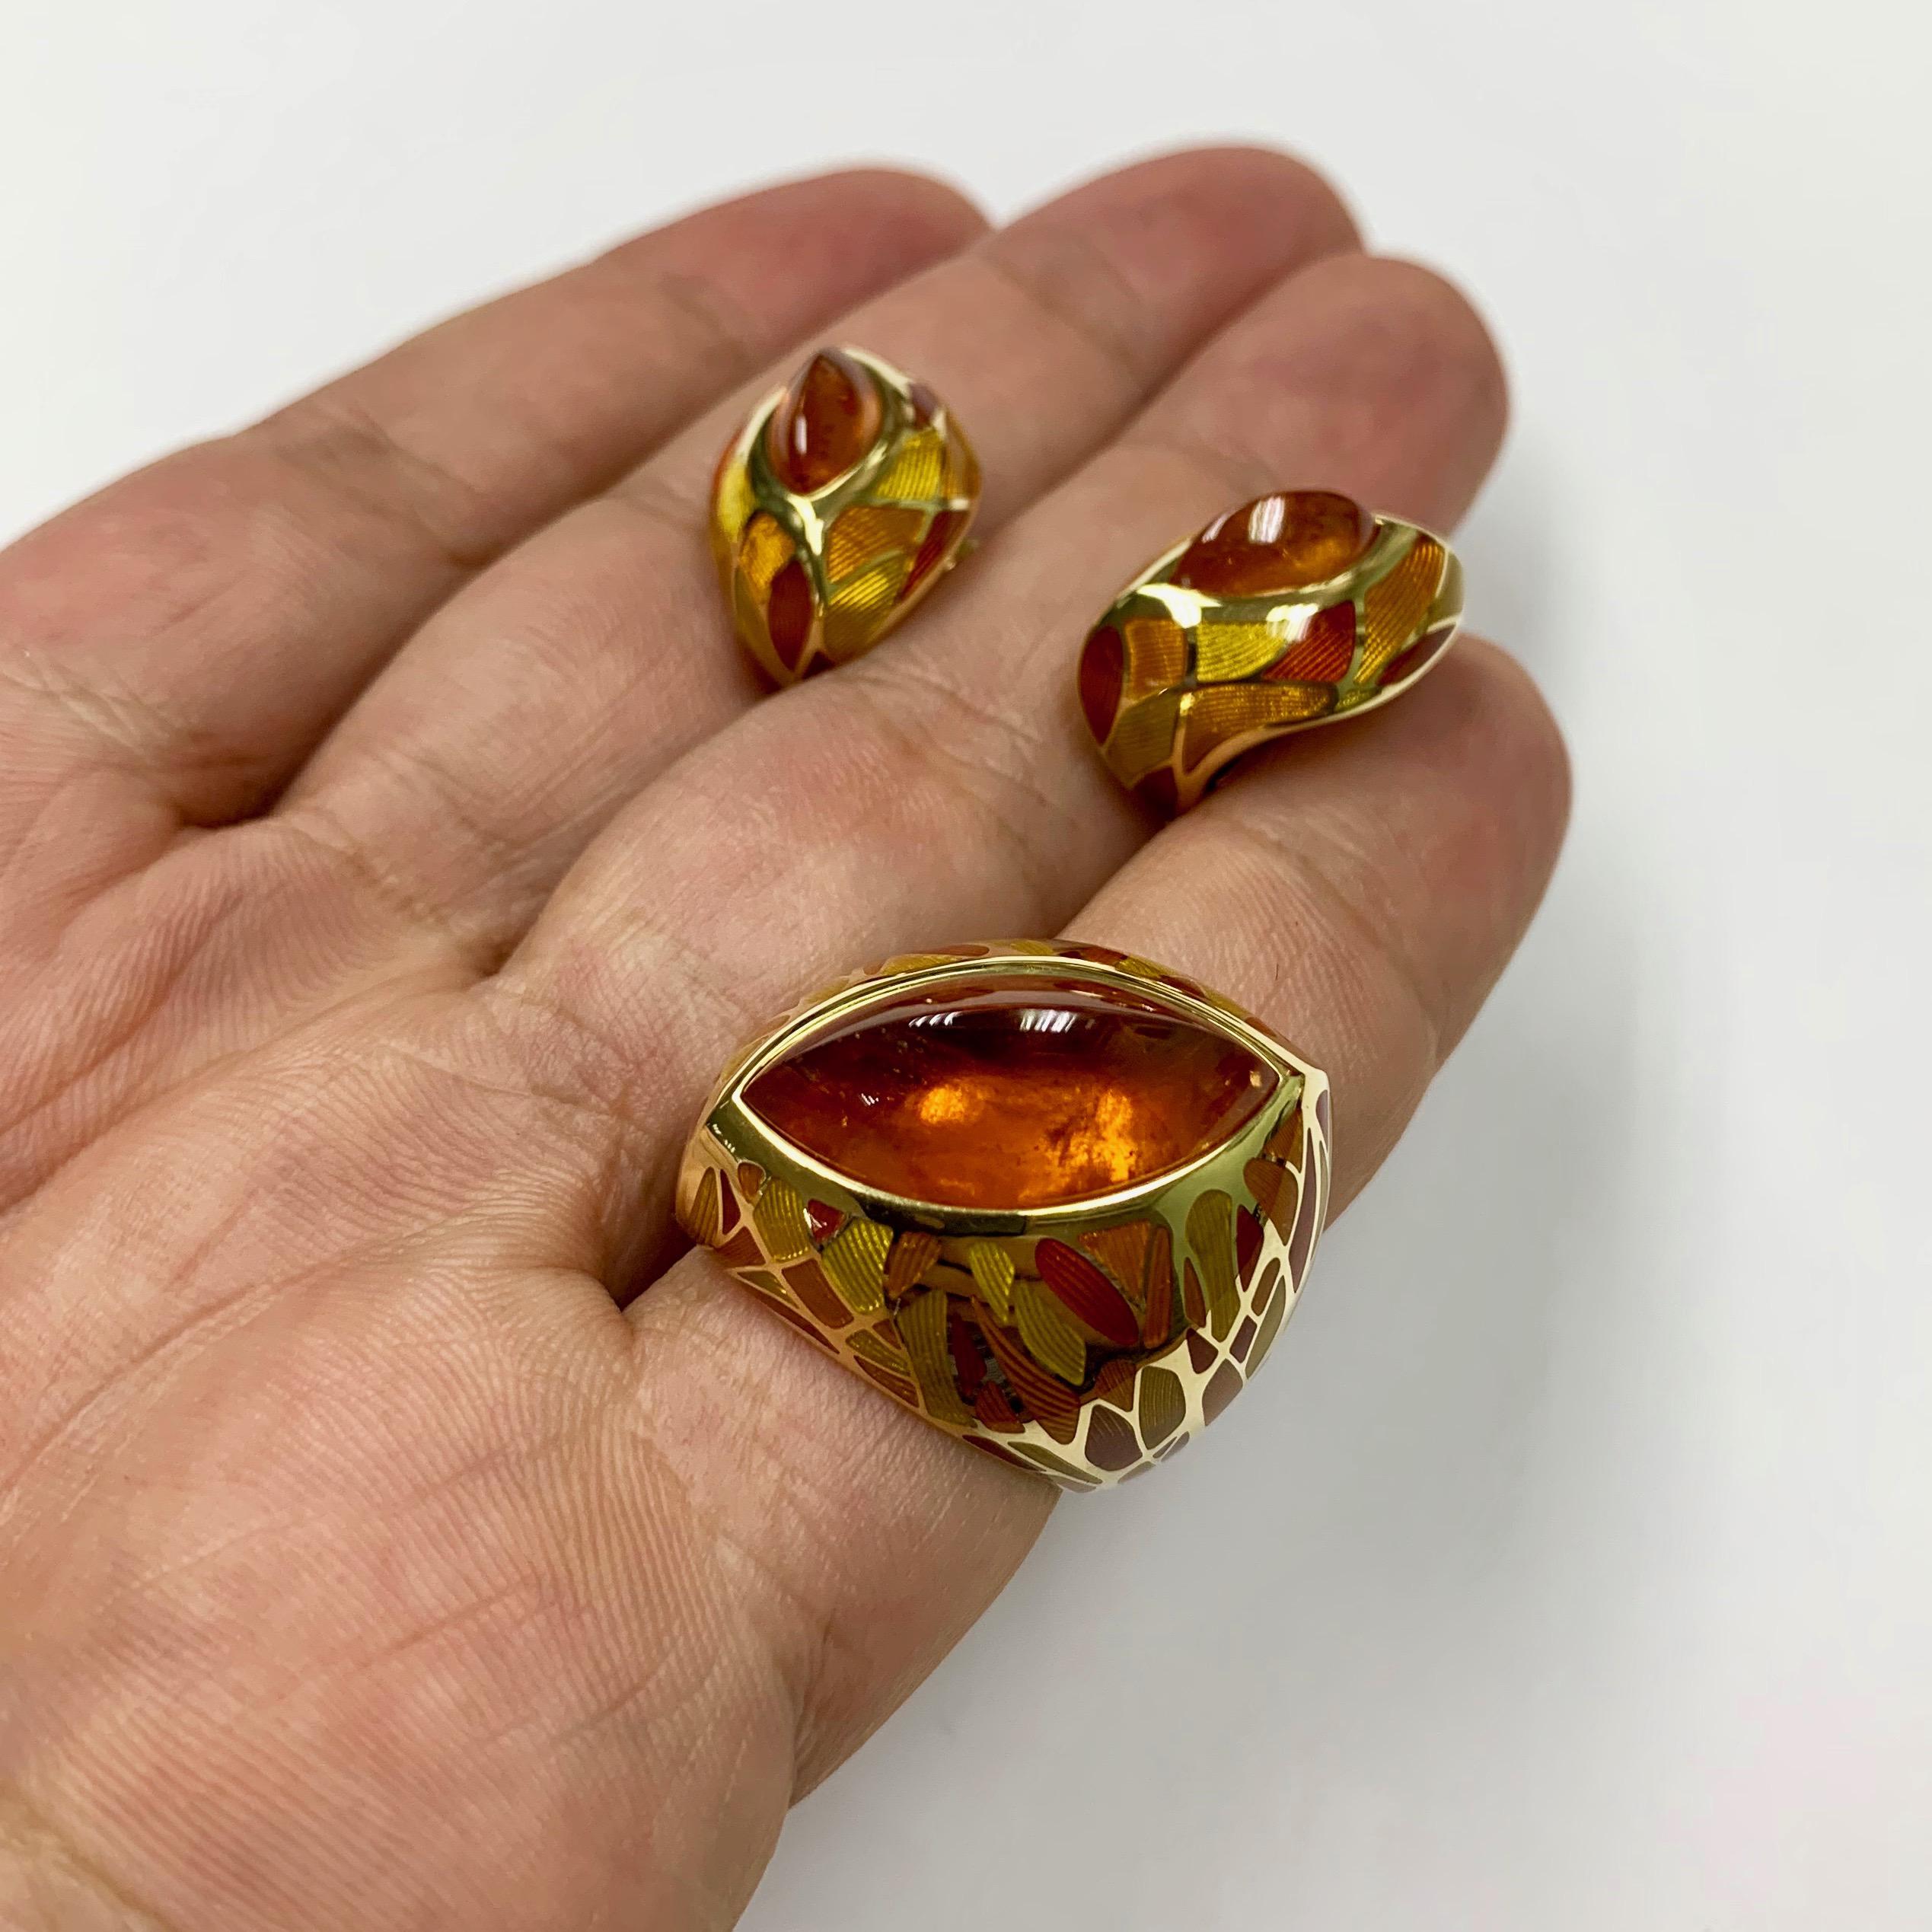 Spessartine Garnet Enamel 18 Karat Yellow Gold Suite

A riot of yellow and orange colors, warm of citrus tea on a rainy autumn day, a smoldering log in the fireplace of a country house, all of this is our stunning Earrings. Take a look at these